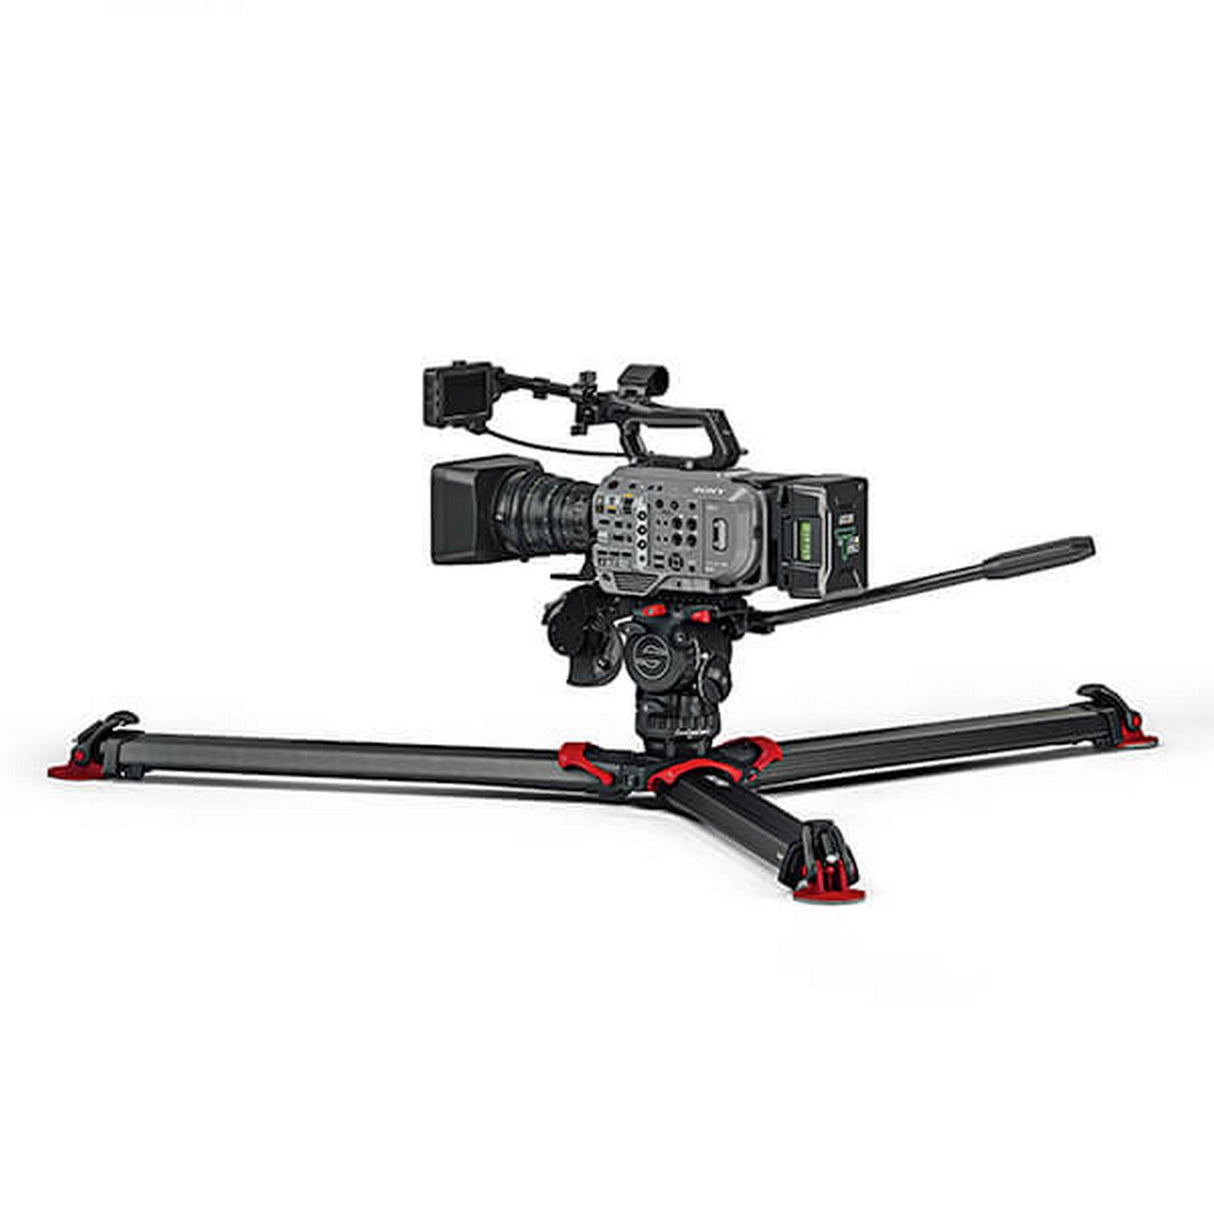 Sachtler S2064S-FTGS System aktiv6 flowtech75 GS Tripod with Spreader, Handle and Bag